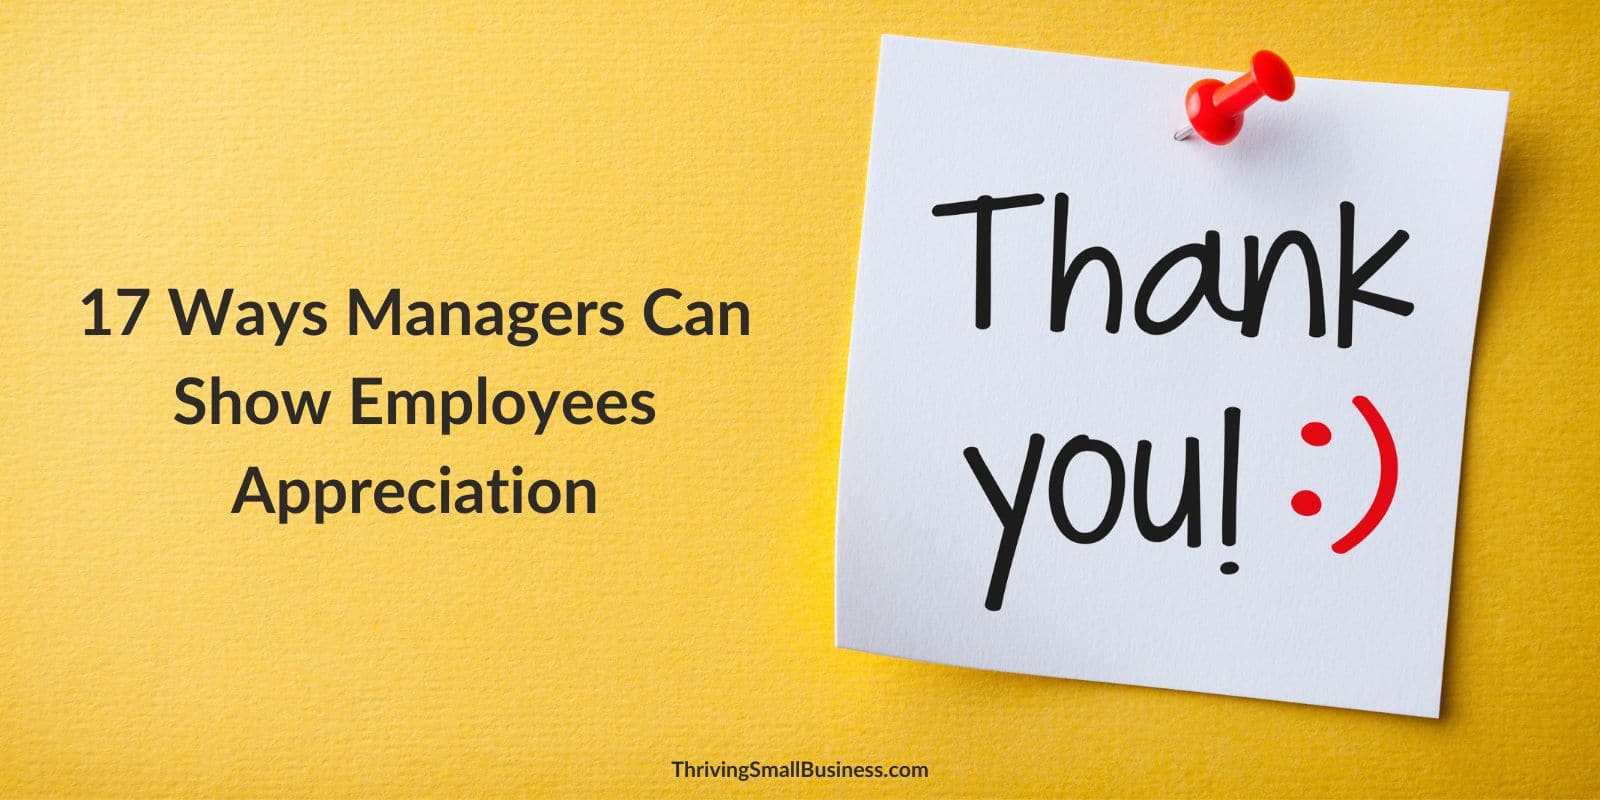 Learn How to show employees that you appreciate them